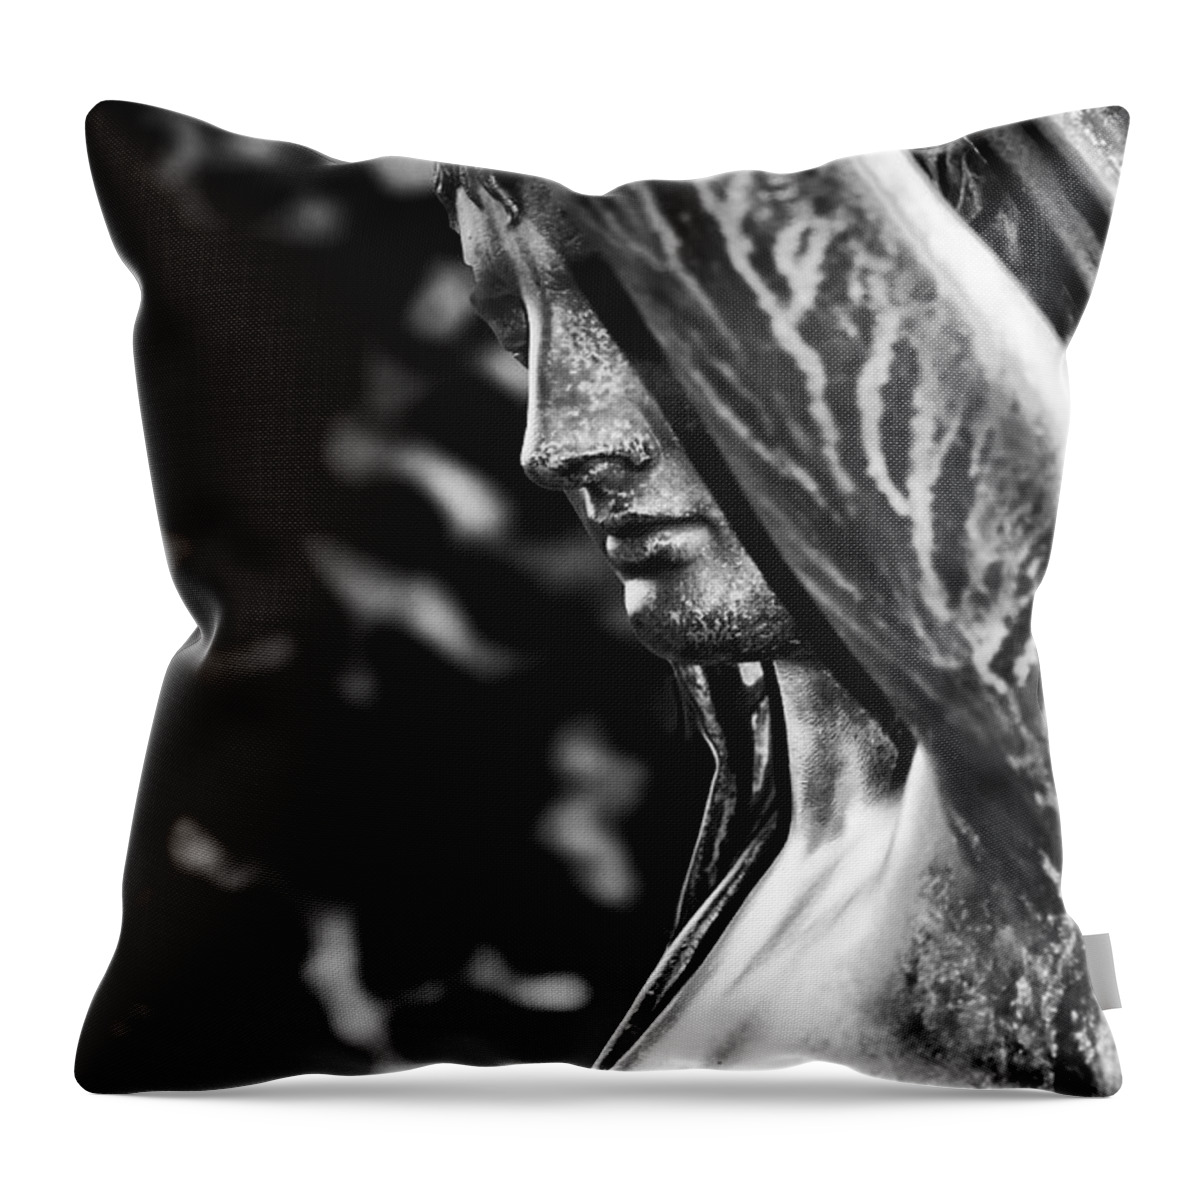 Fairmount Park Throw Pillow featuring the photograph Lady in the Garden 1 by Bill Cannon